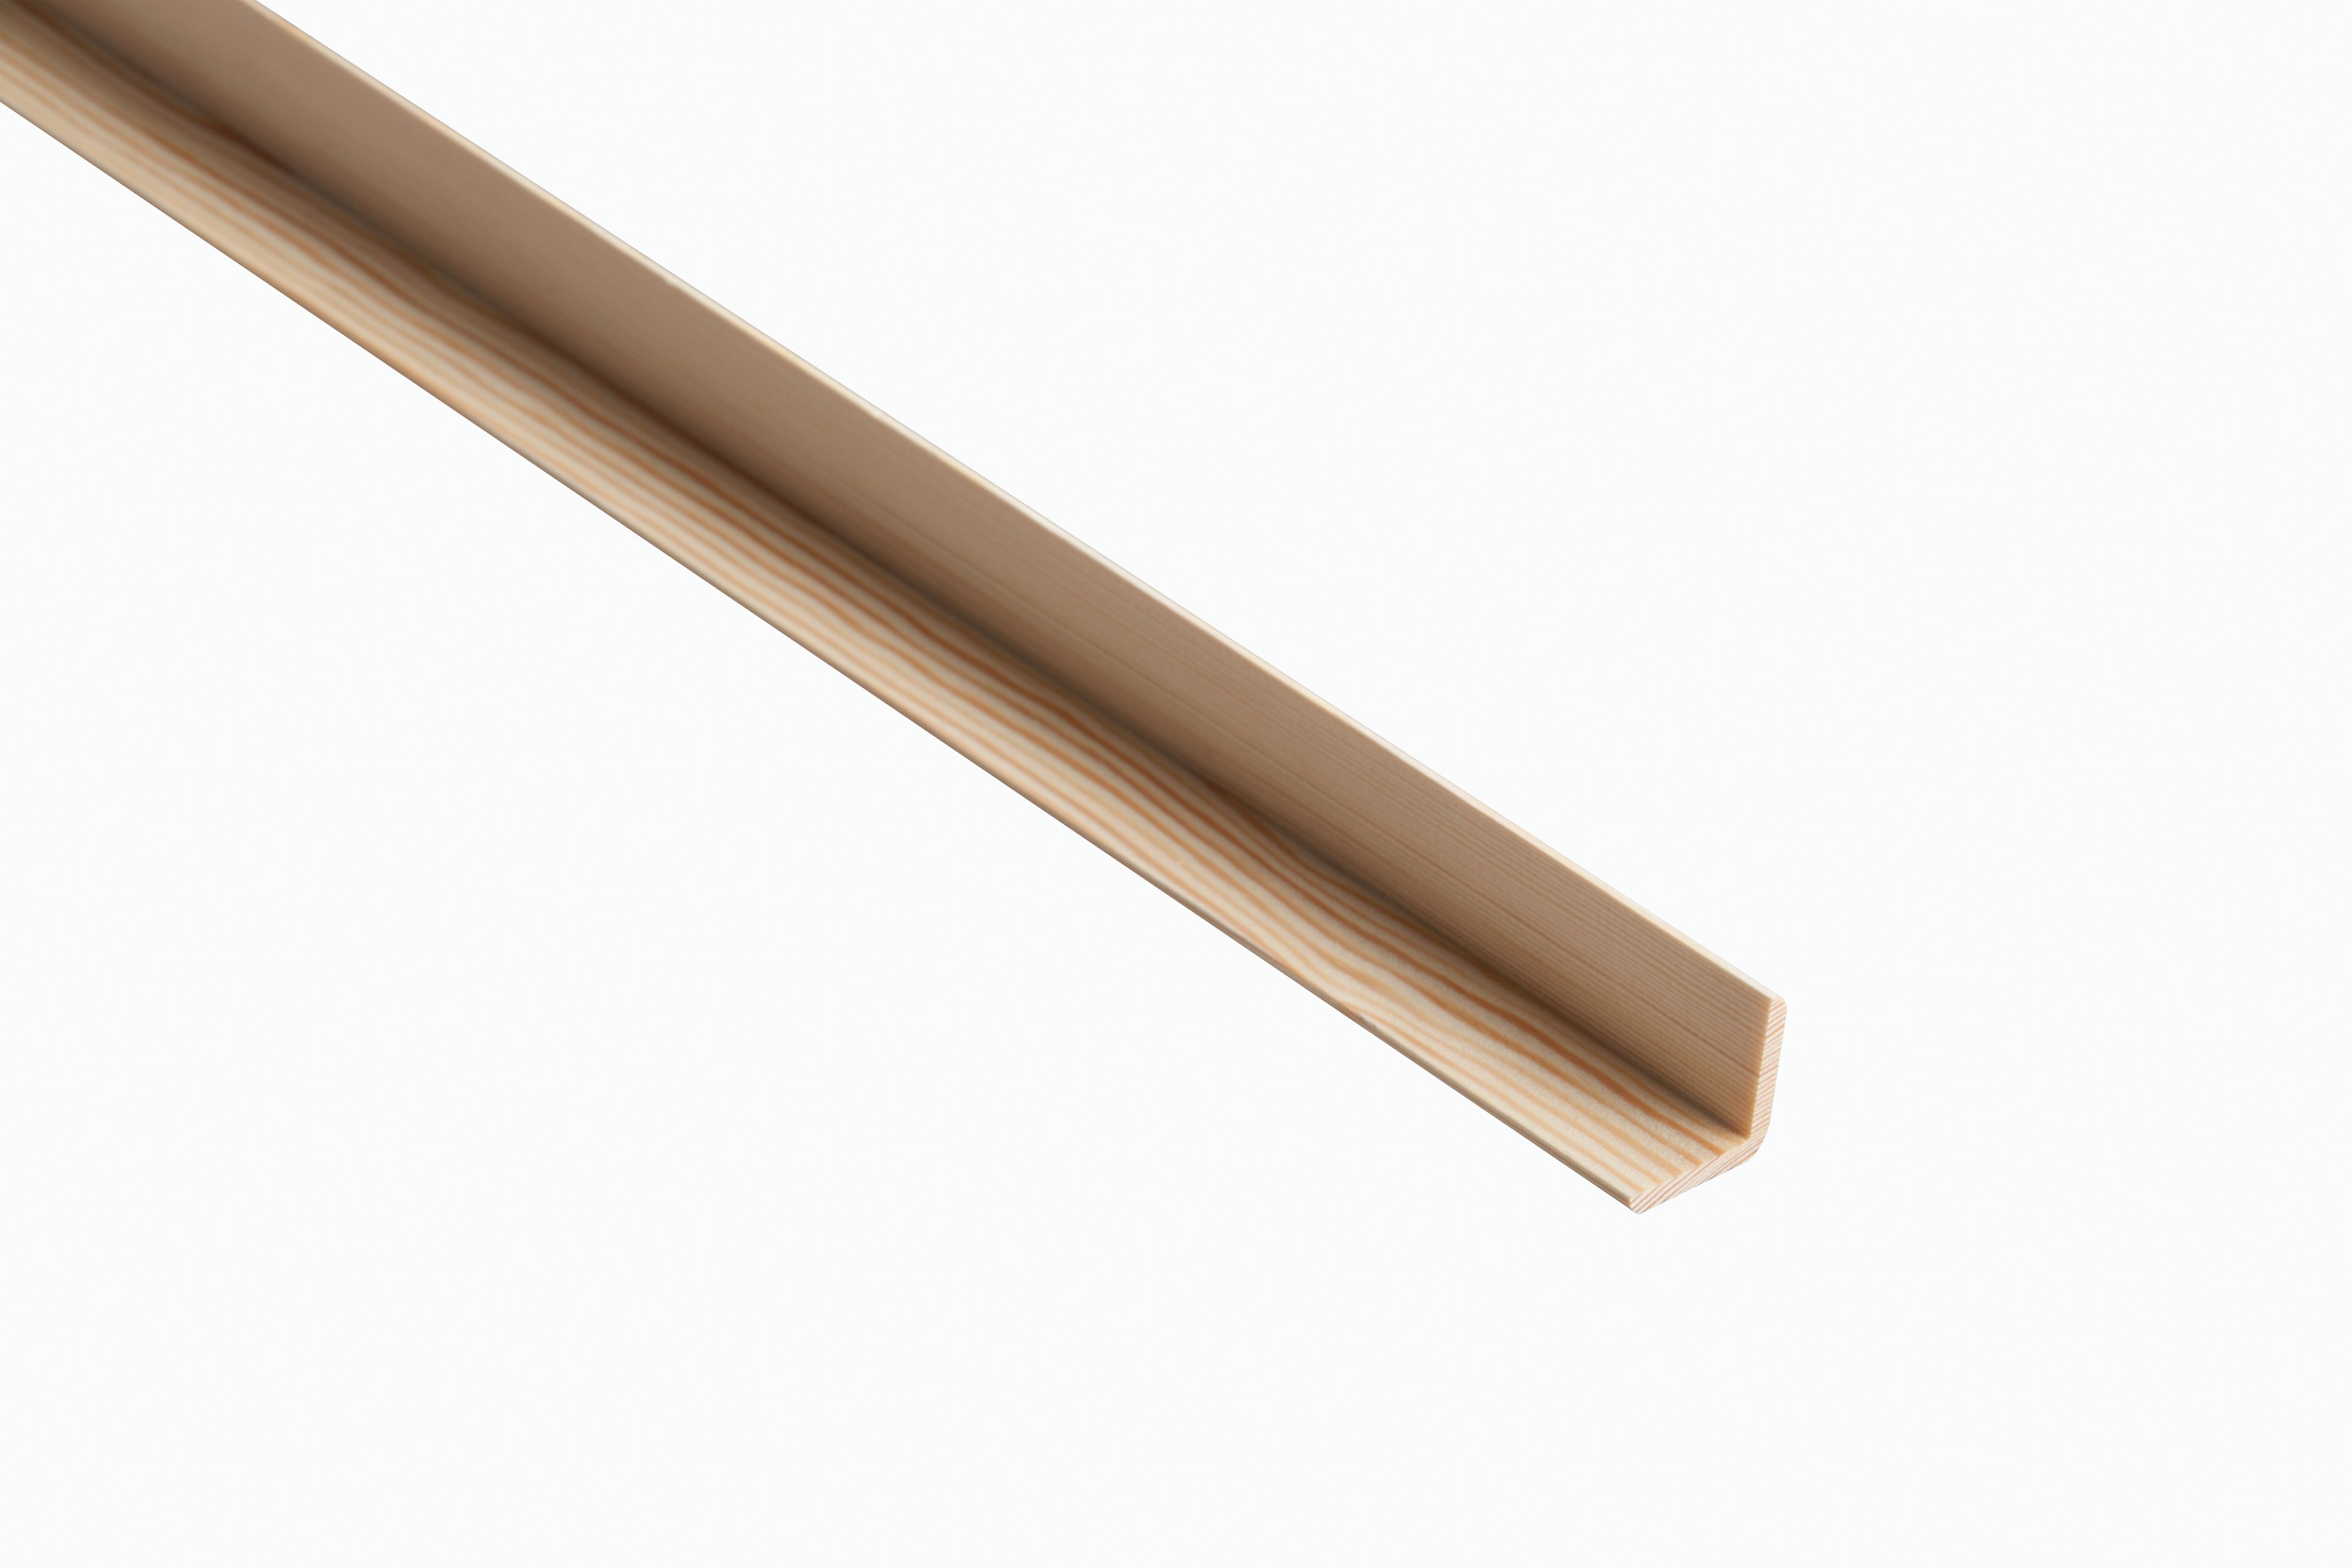 Image of Wickes Pine Angle Moulding - 34 x 34 x 2400mm